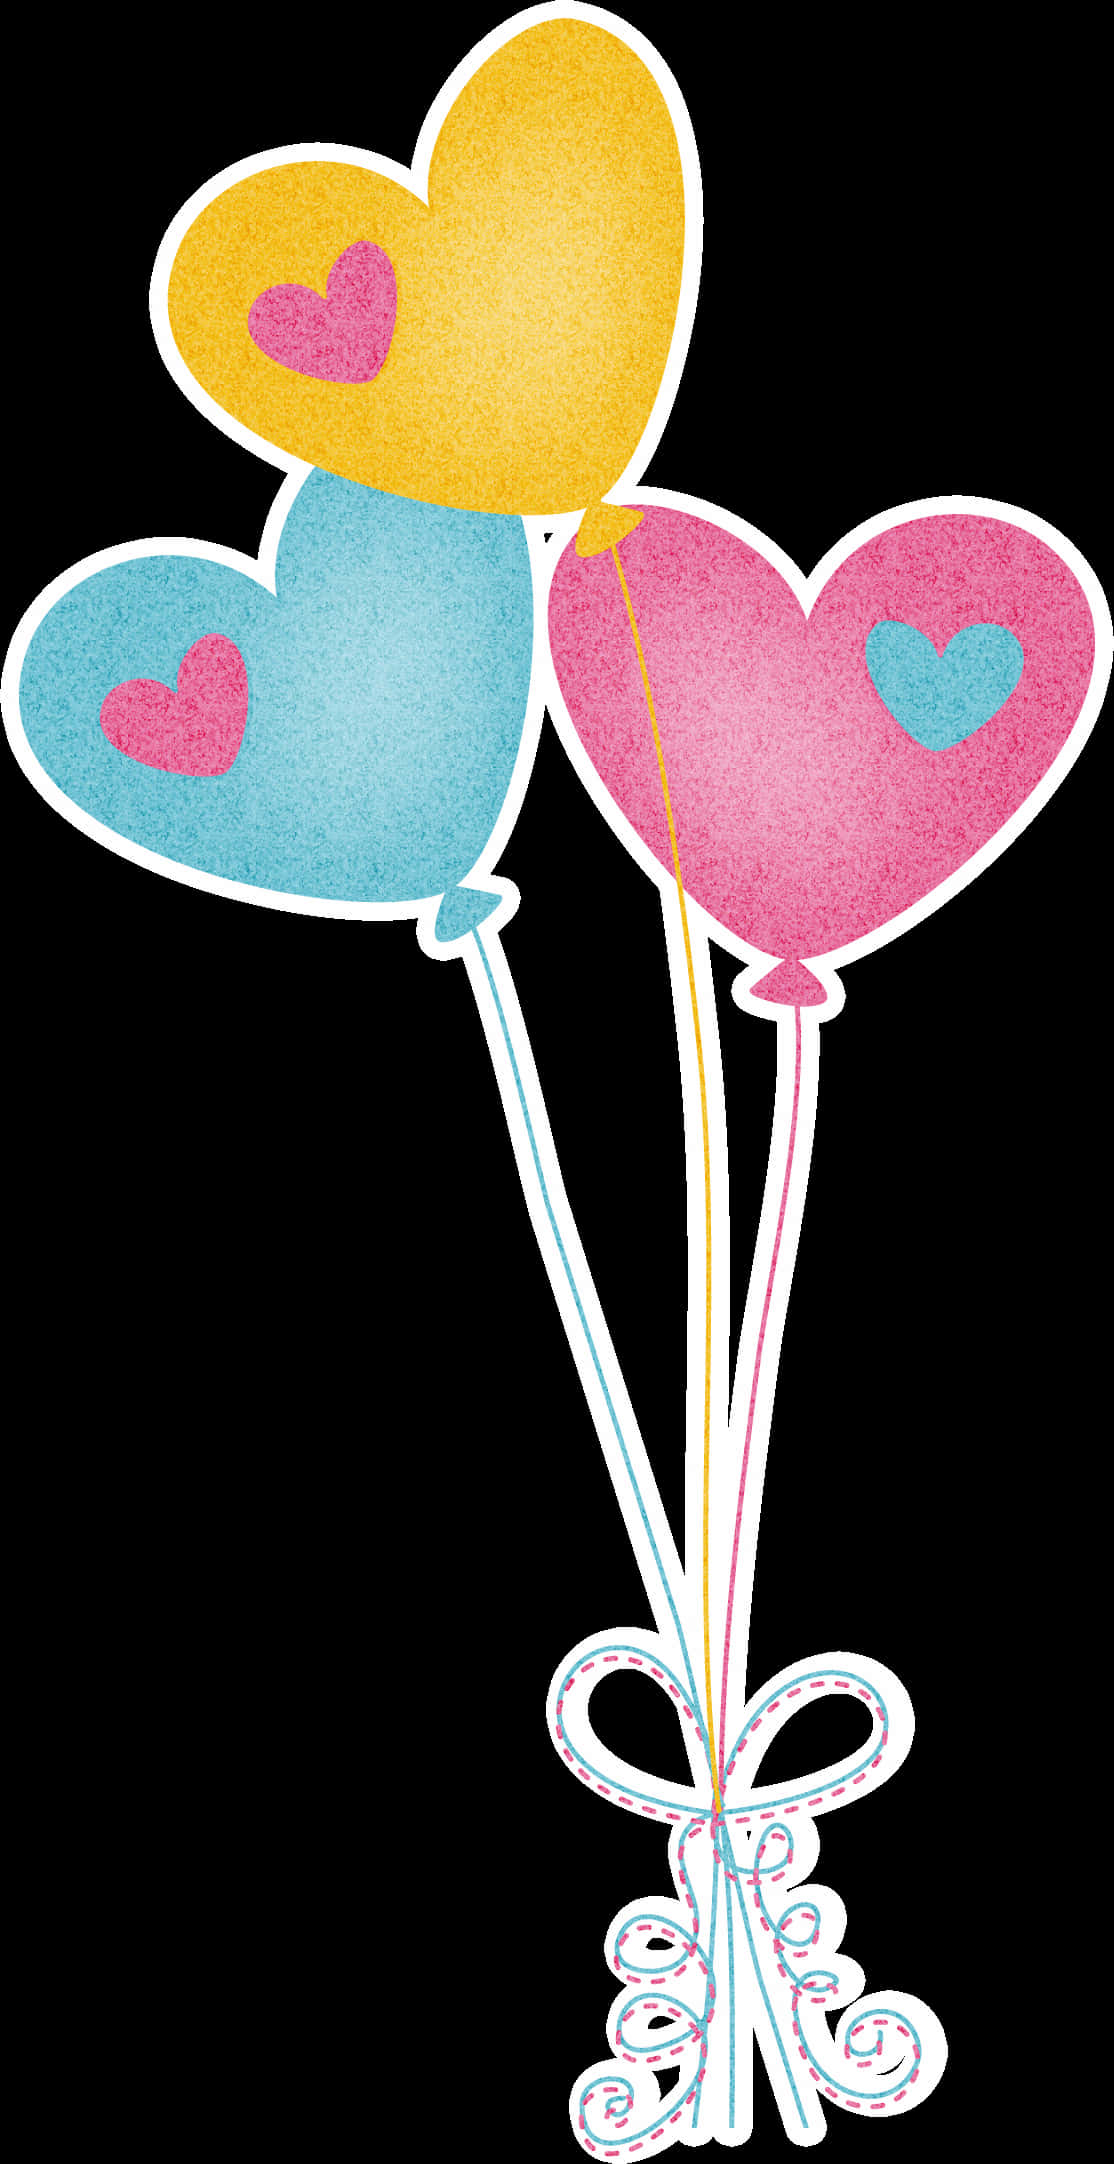 Heart Shaped Balloons Illustration PNG image